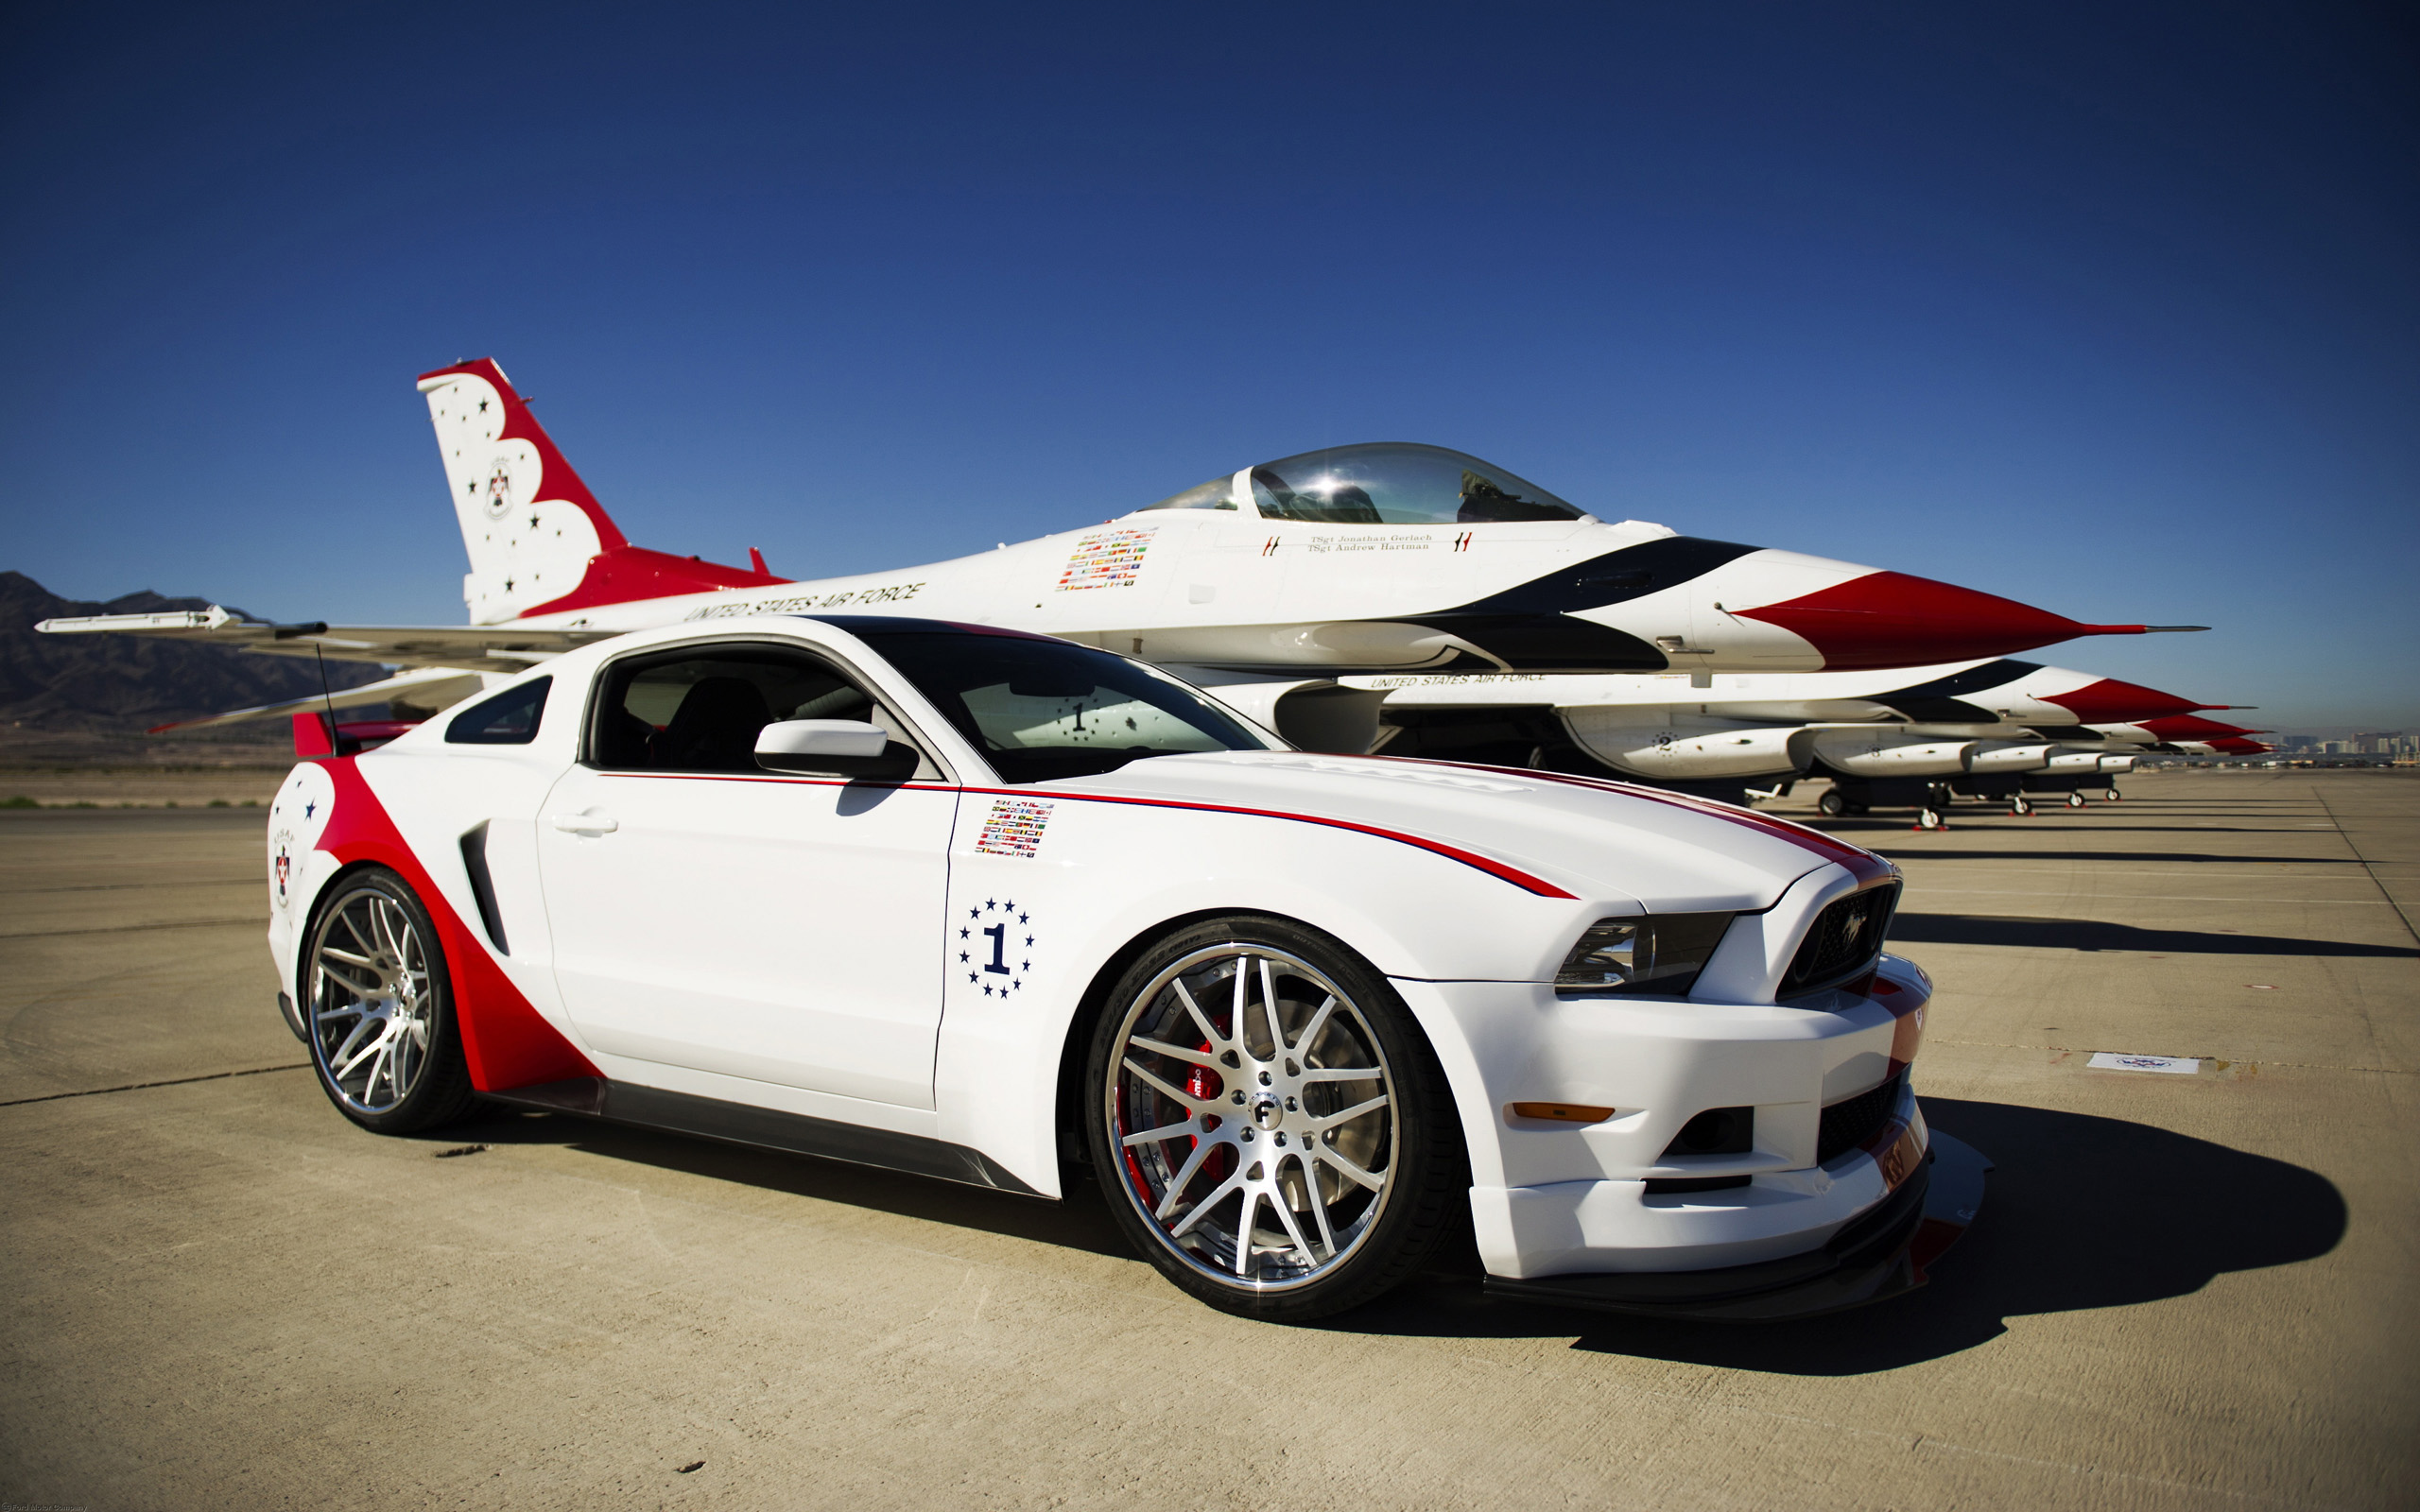 2014 Ford Mustang GT US Air Force Thunderbirds Edition Wallpaper HD